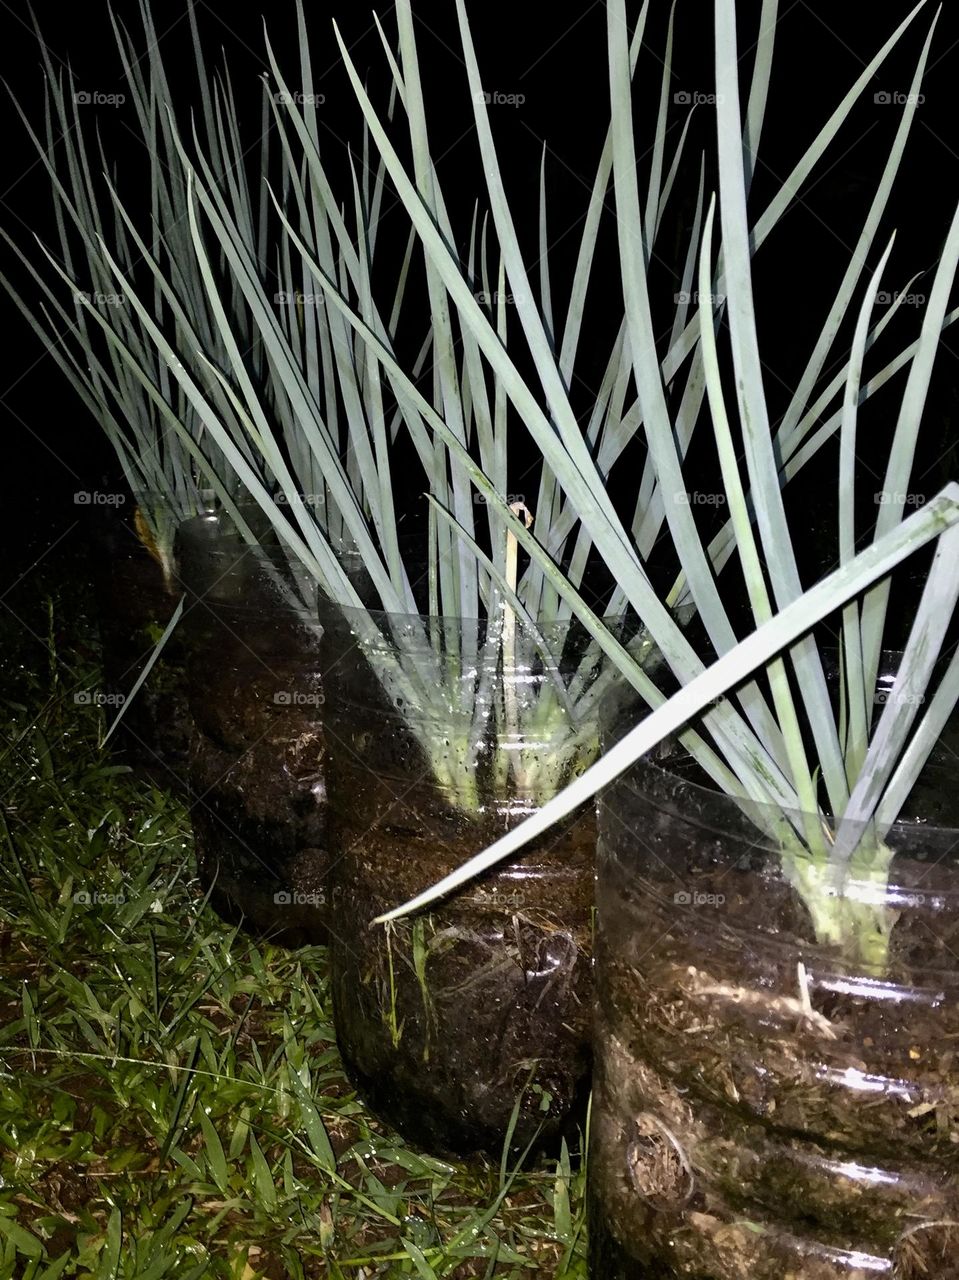 Scallions planted in a disposable plastic bottle for alternative to prevent solid waste at home with the used of coco peat and rice hull mixed together as a soil media for healthy plants and at the same time an organic fertilizers.